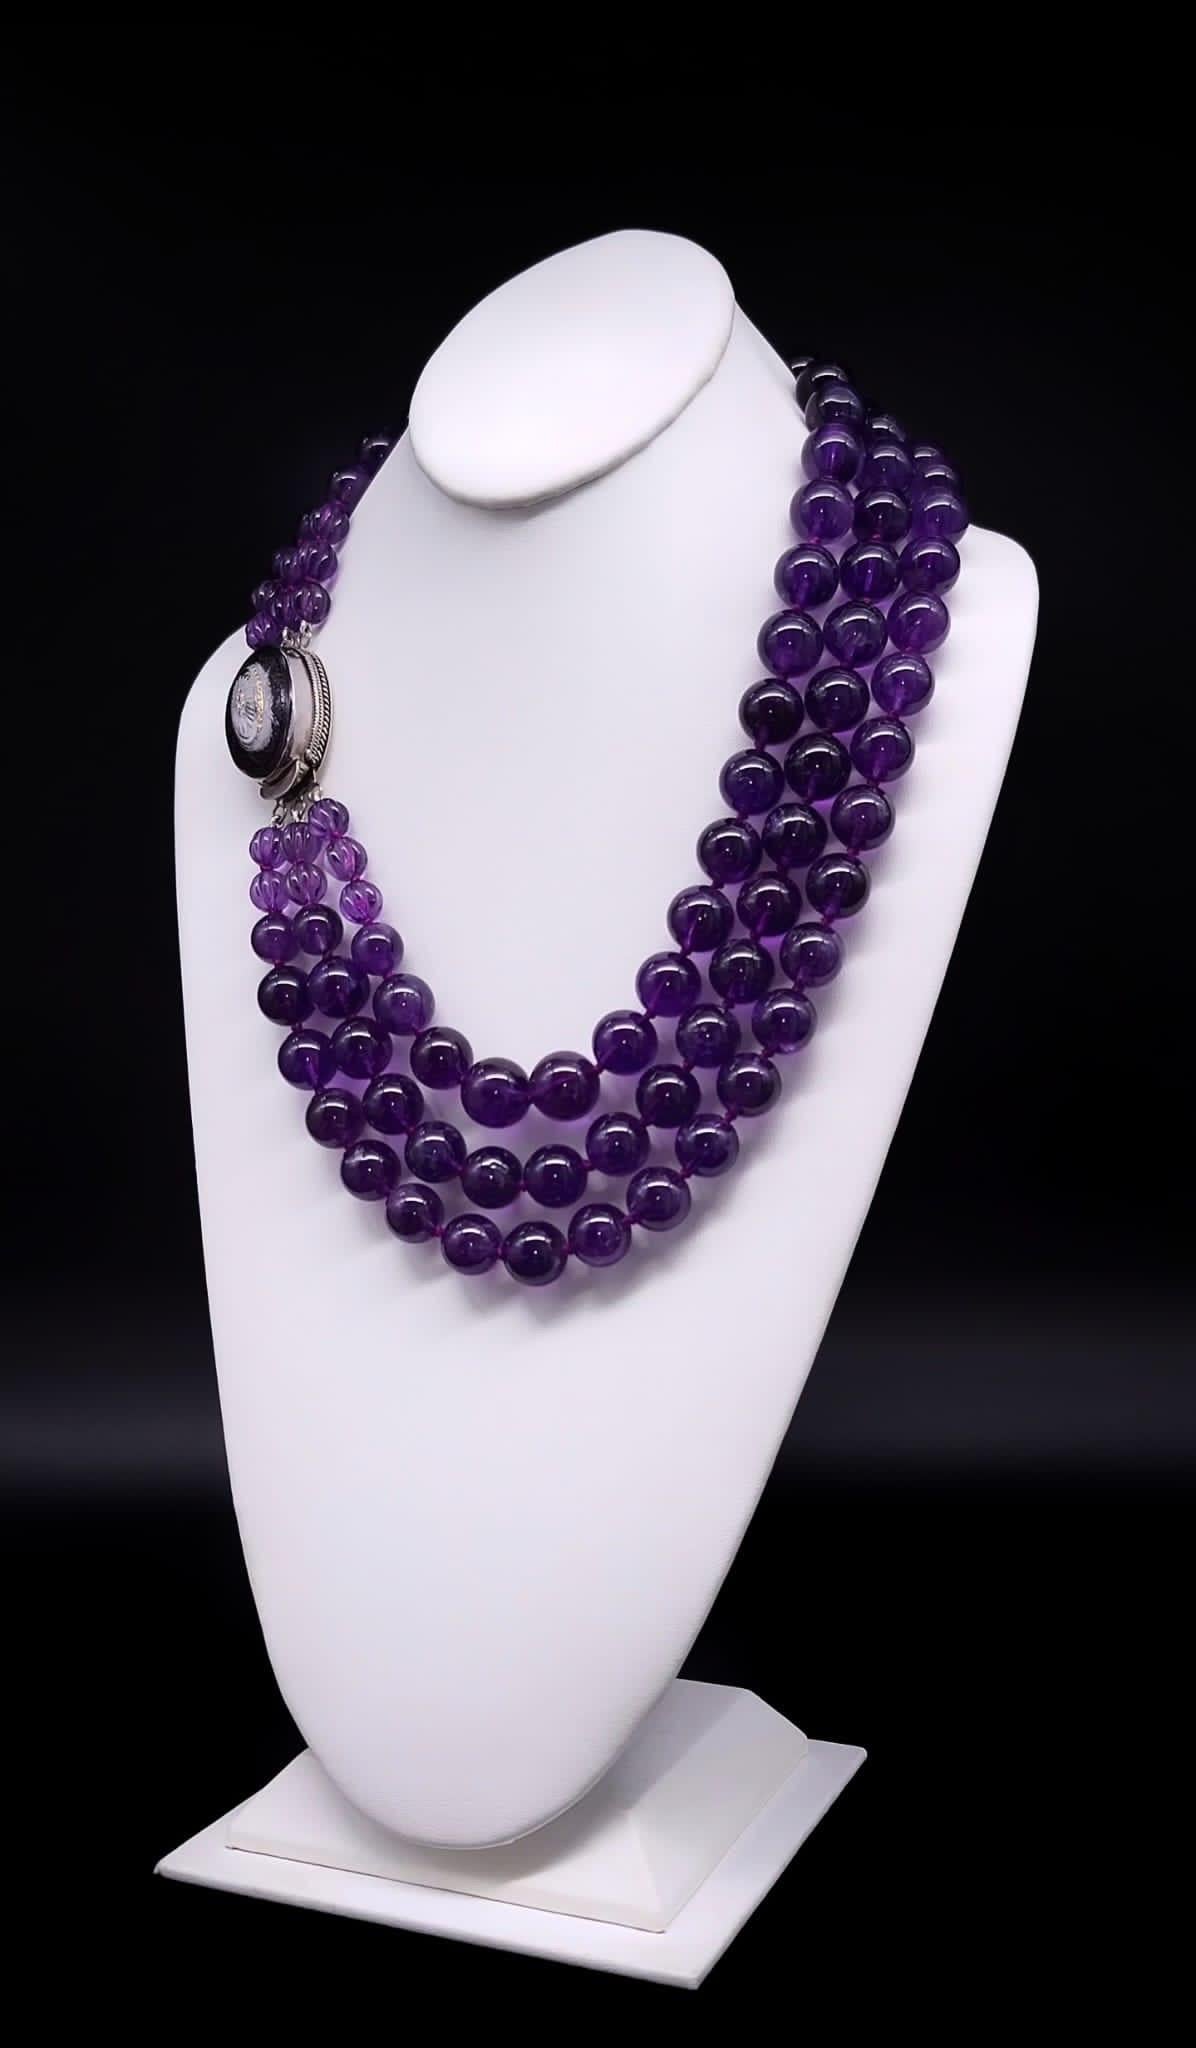 Contemporary A.Jeschel  Amethyst necklace with a Vintage Venetian glass clasp.